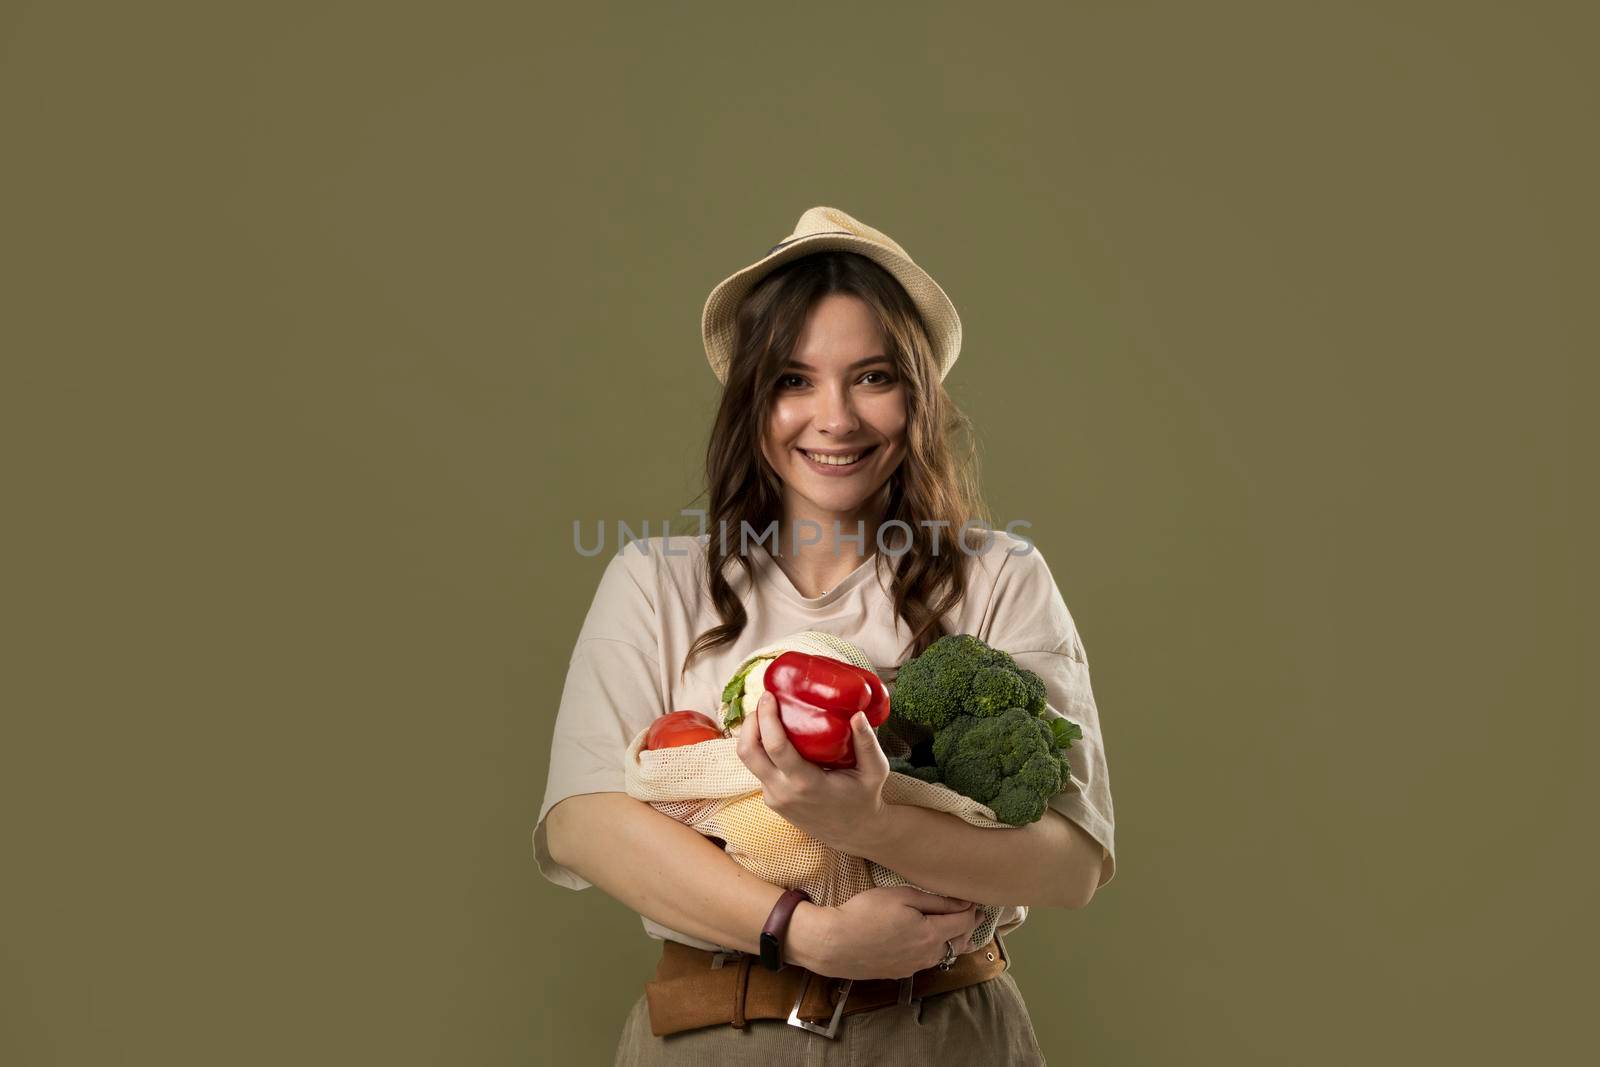 Portrait of happy smiling young woman in beige oversize t-shirt holding reusable string bag with groceries over green background. Sustainability, eco living and people concept